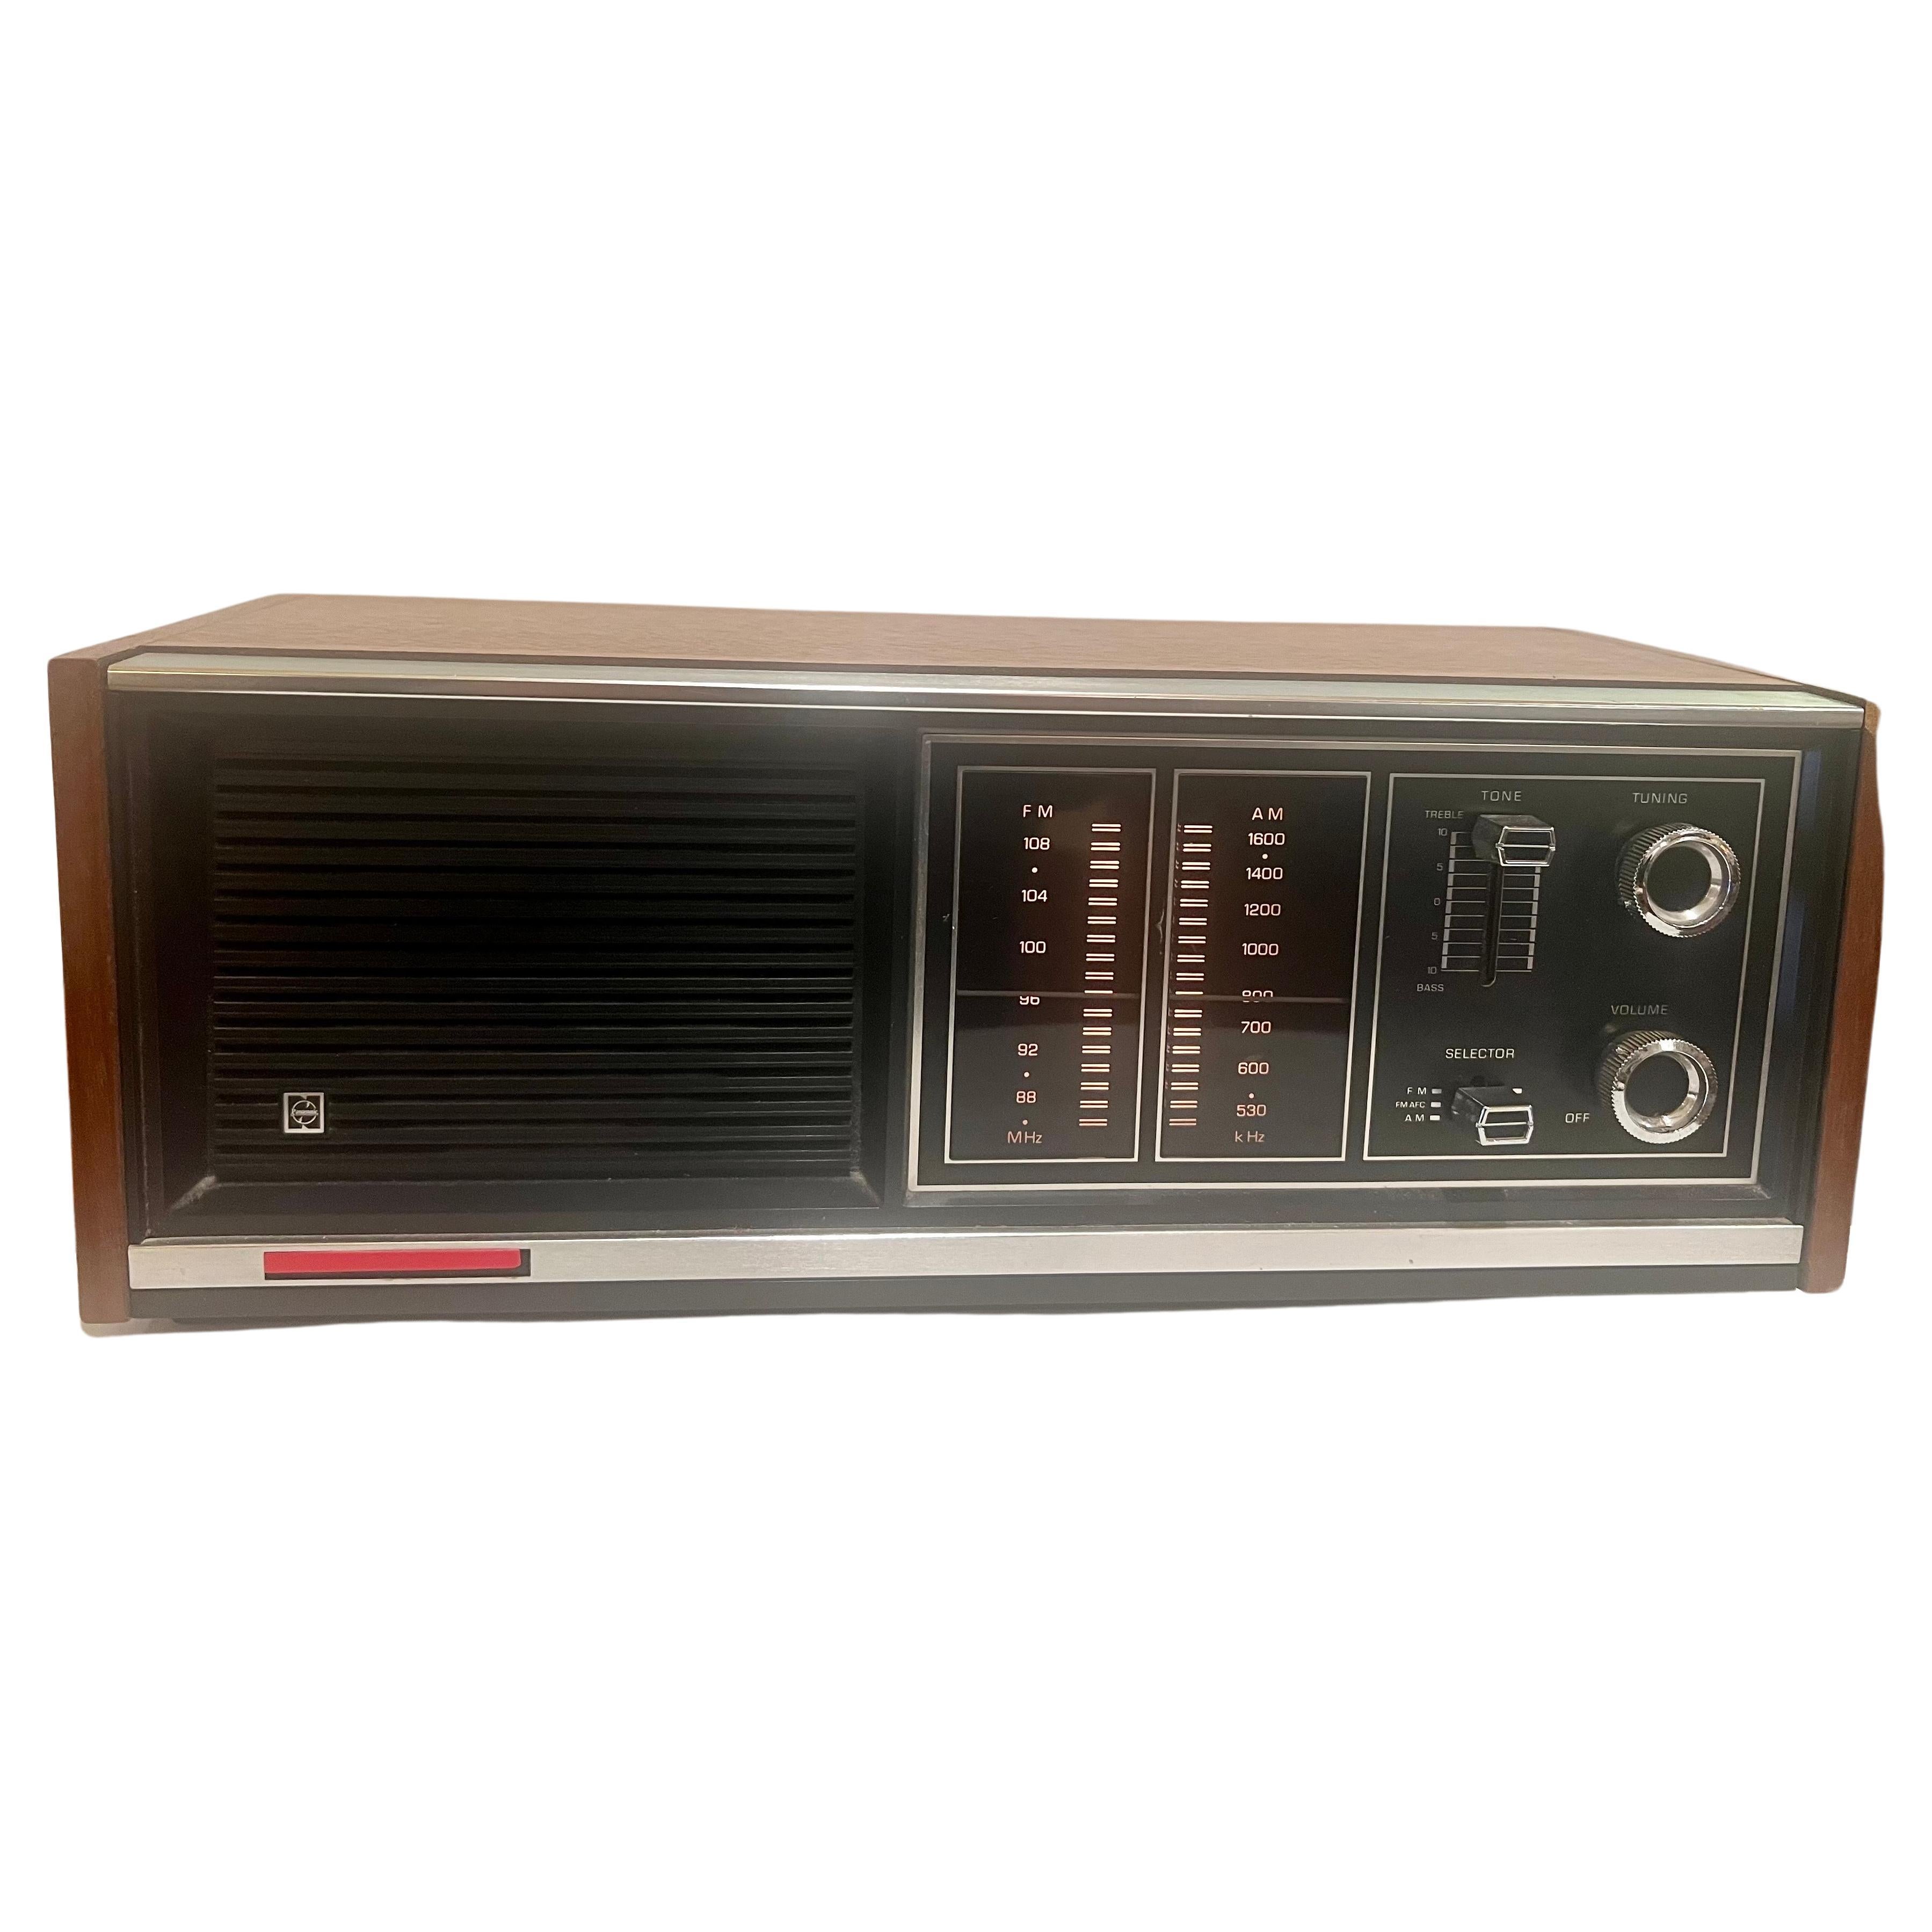 Cool in working condition Panasonic Model RE-7371 AM/FM Radio circa 1970's great condition nice teak case with chrome accents .